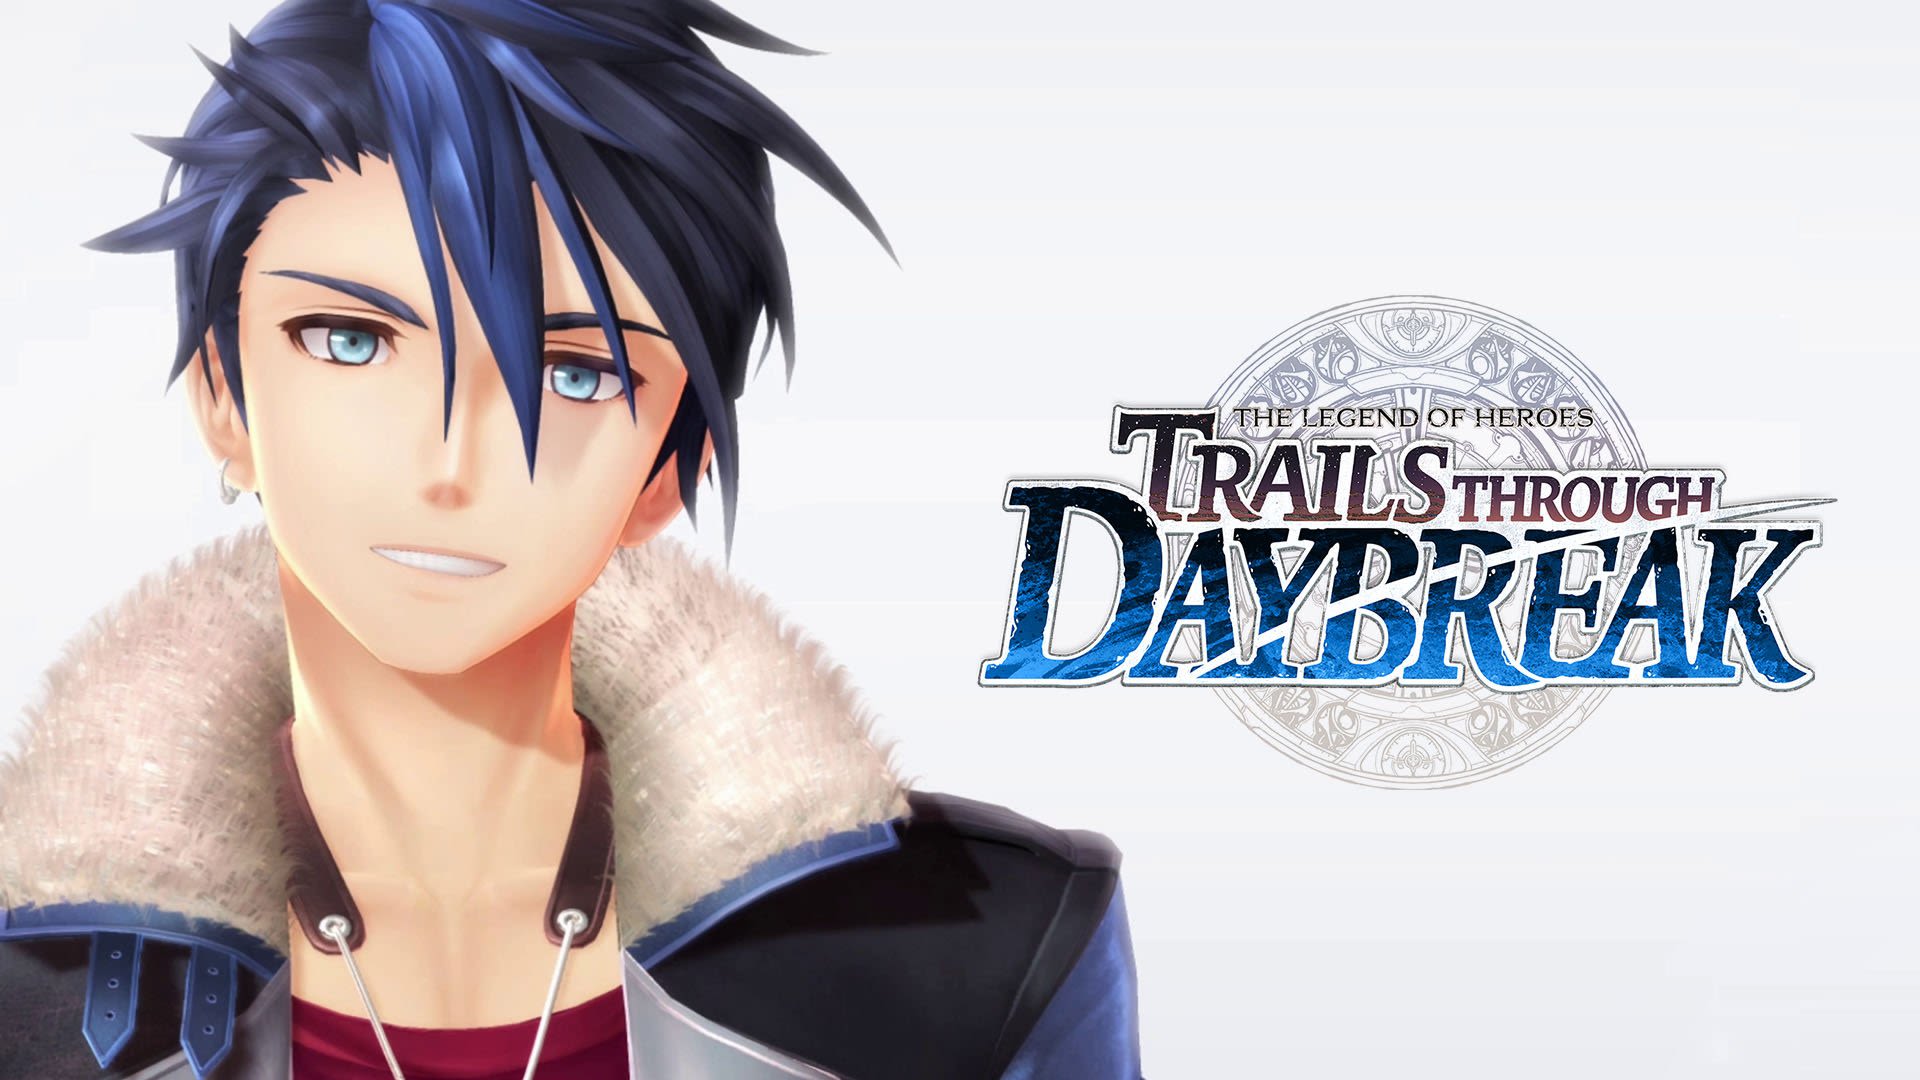 The Legend of Heroes: Trails Through Daybreak demo launches June 4 for PS4, Switch